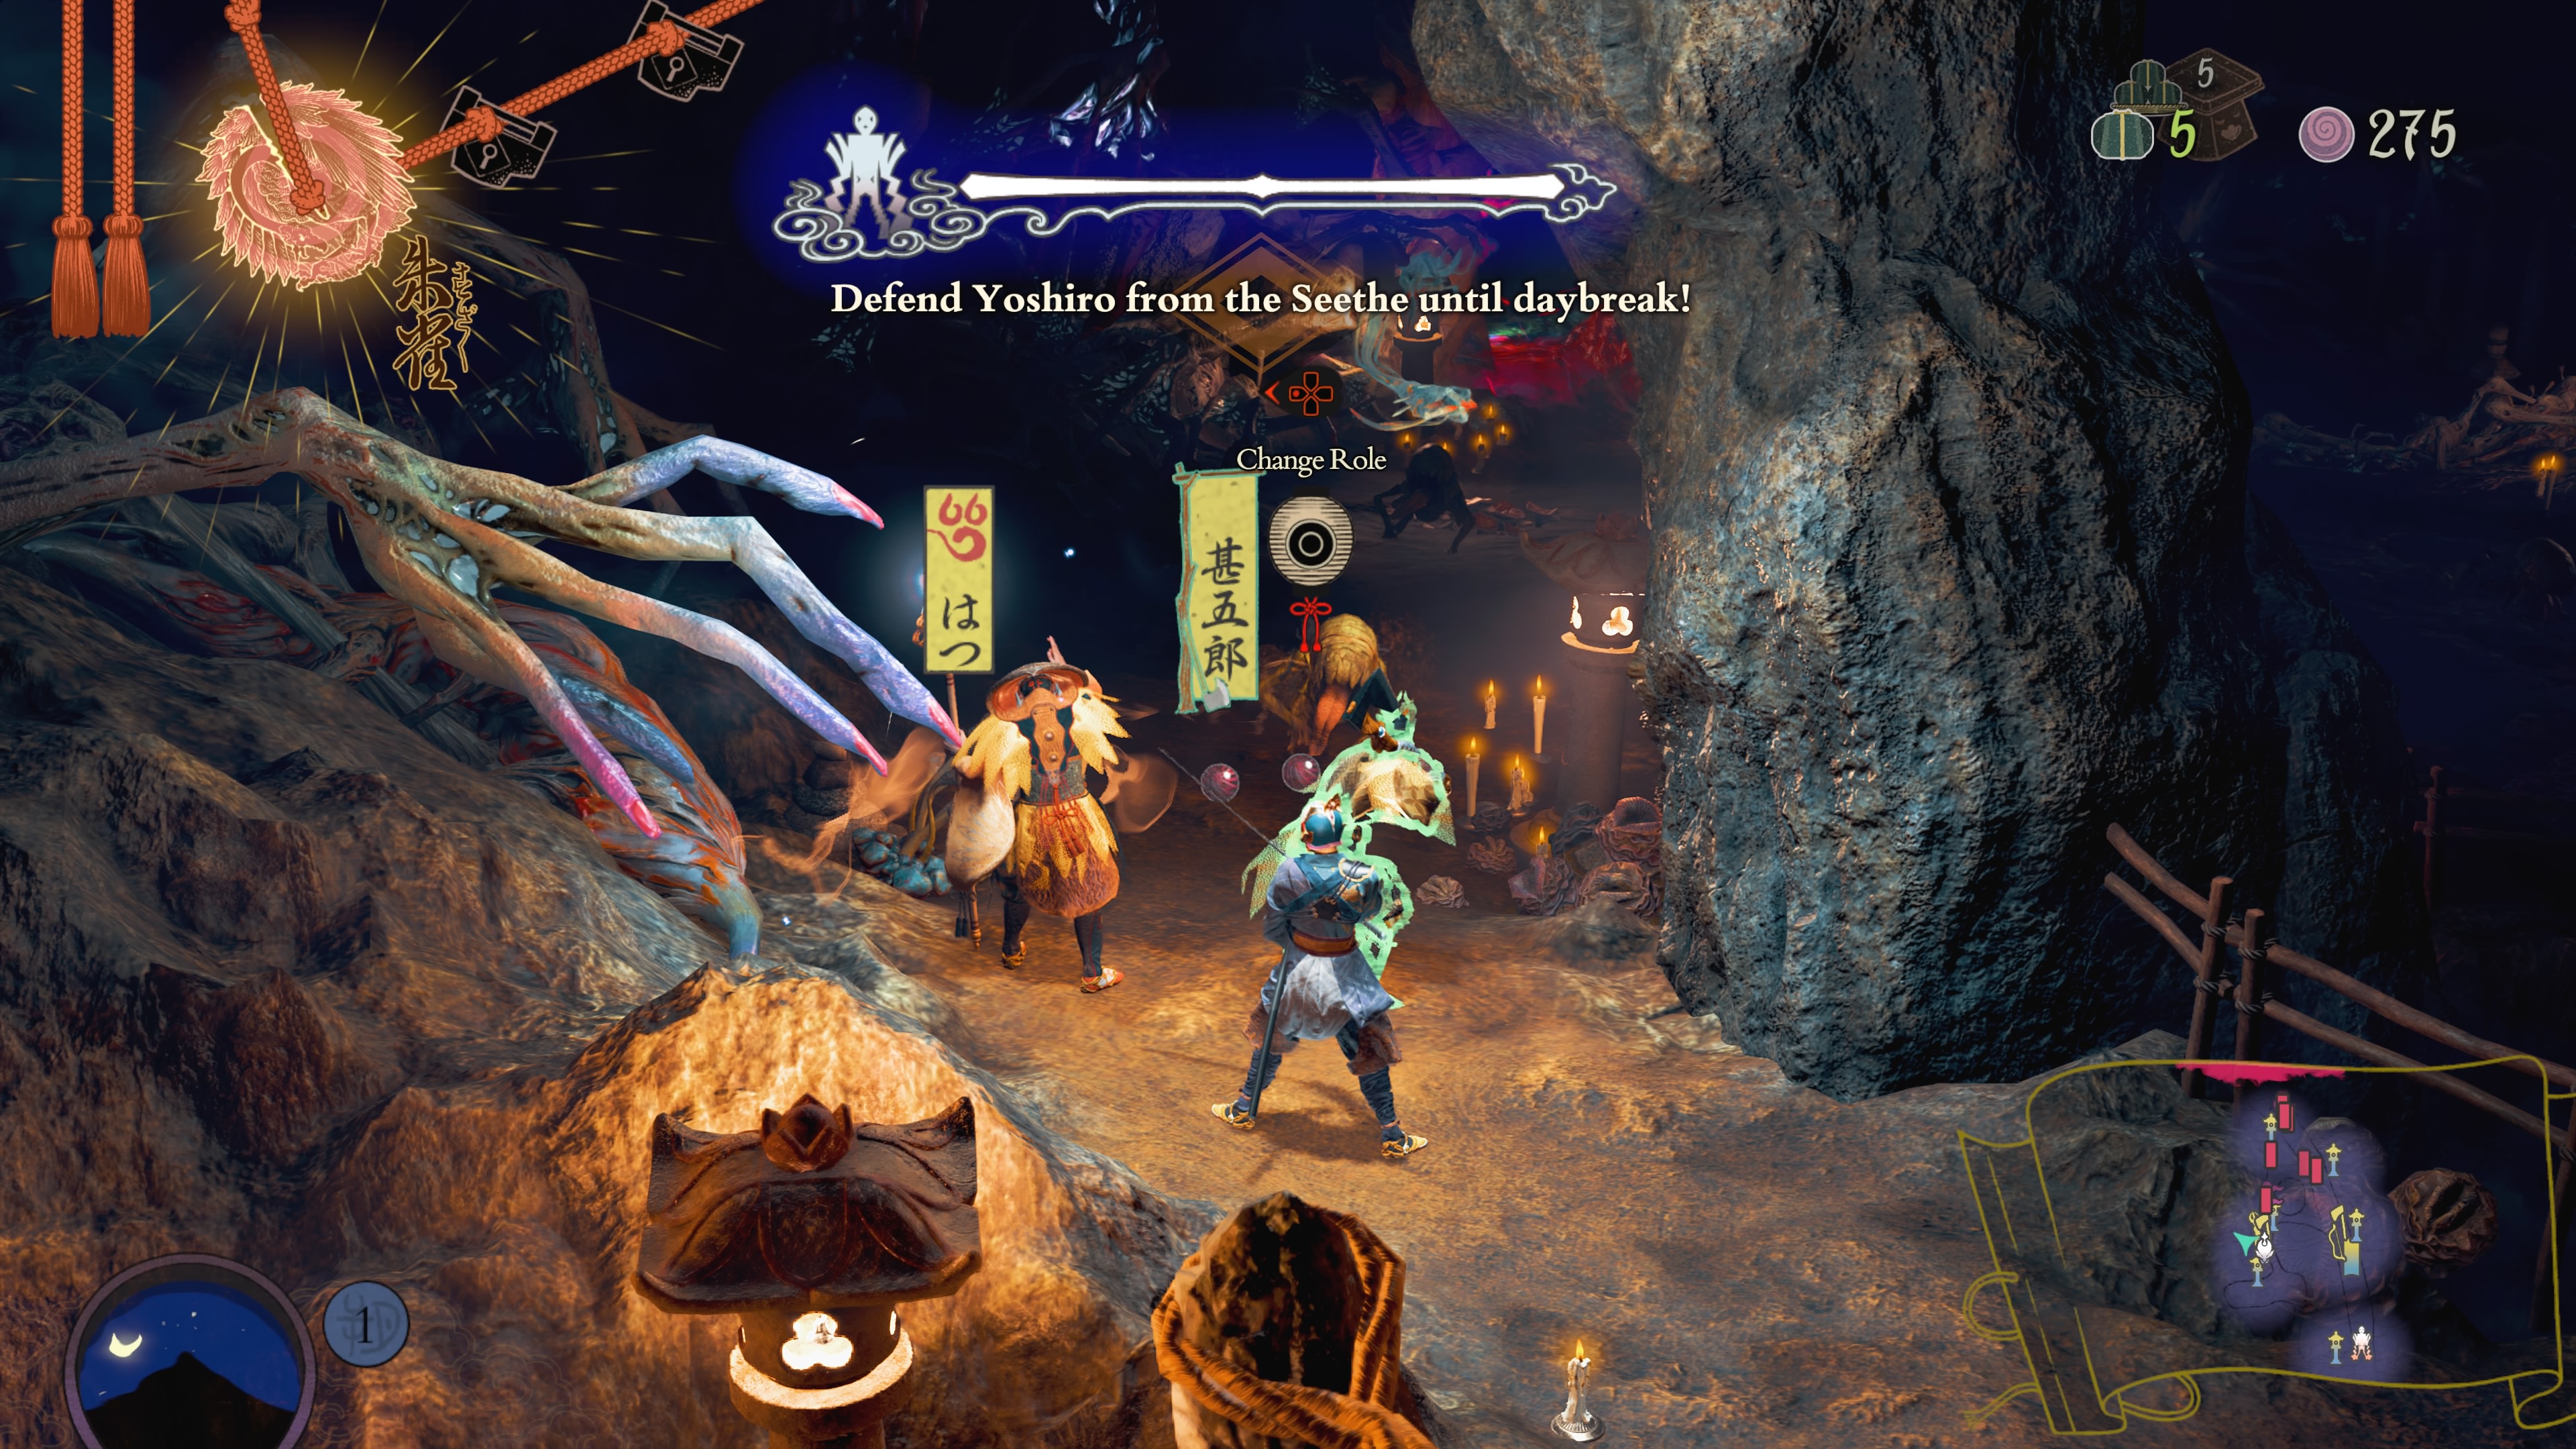 A screenshot showing two units positioned on either side of a small path in a dark cave.